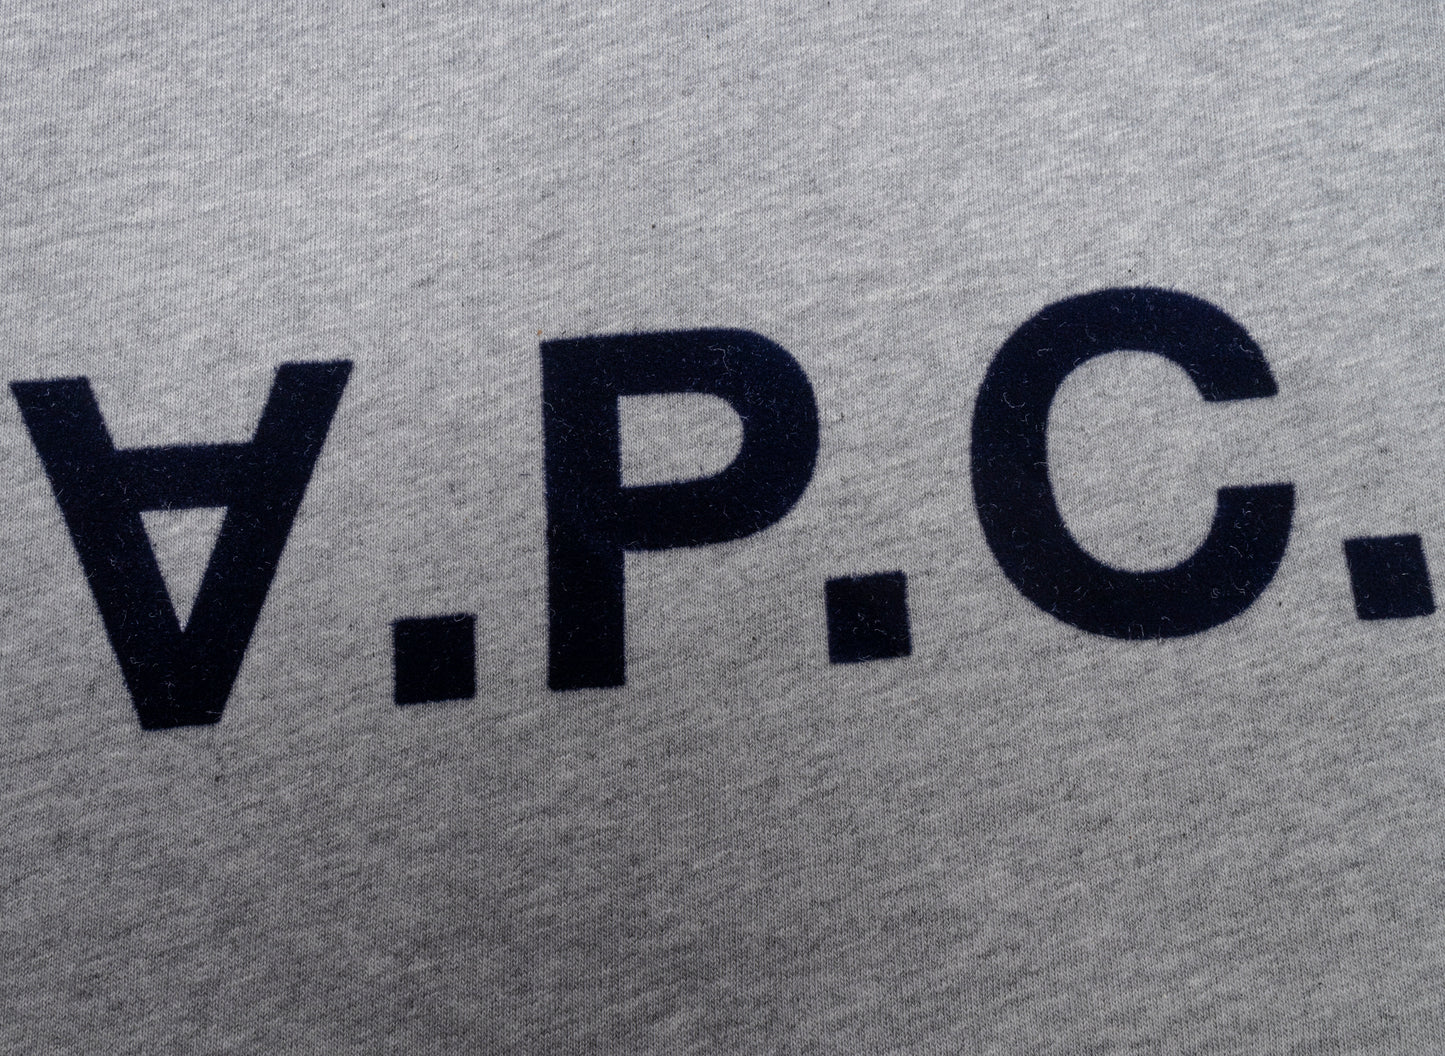 A.P.C. VPC Color H T-Shirt in Grey/Black